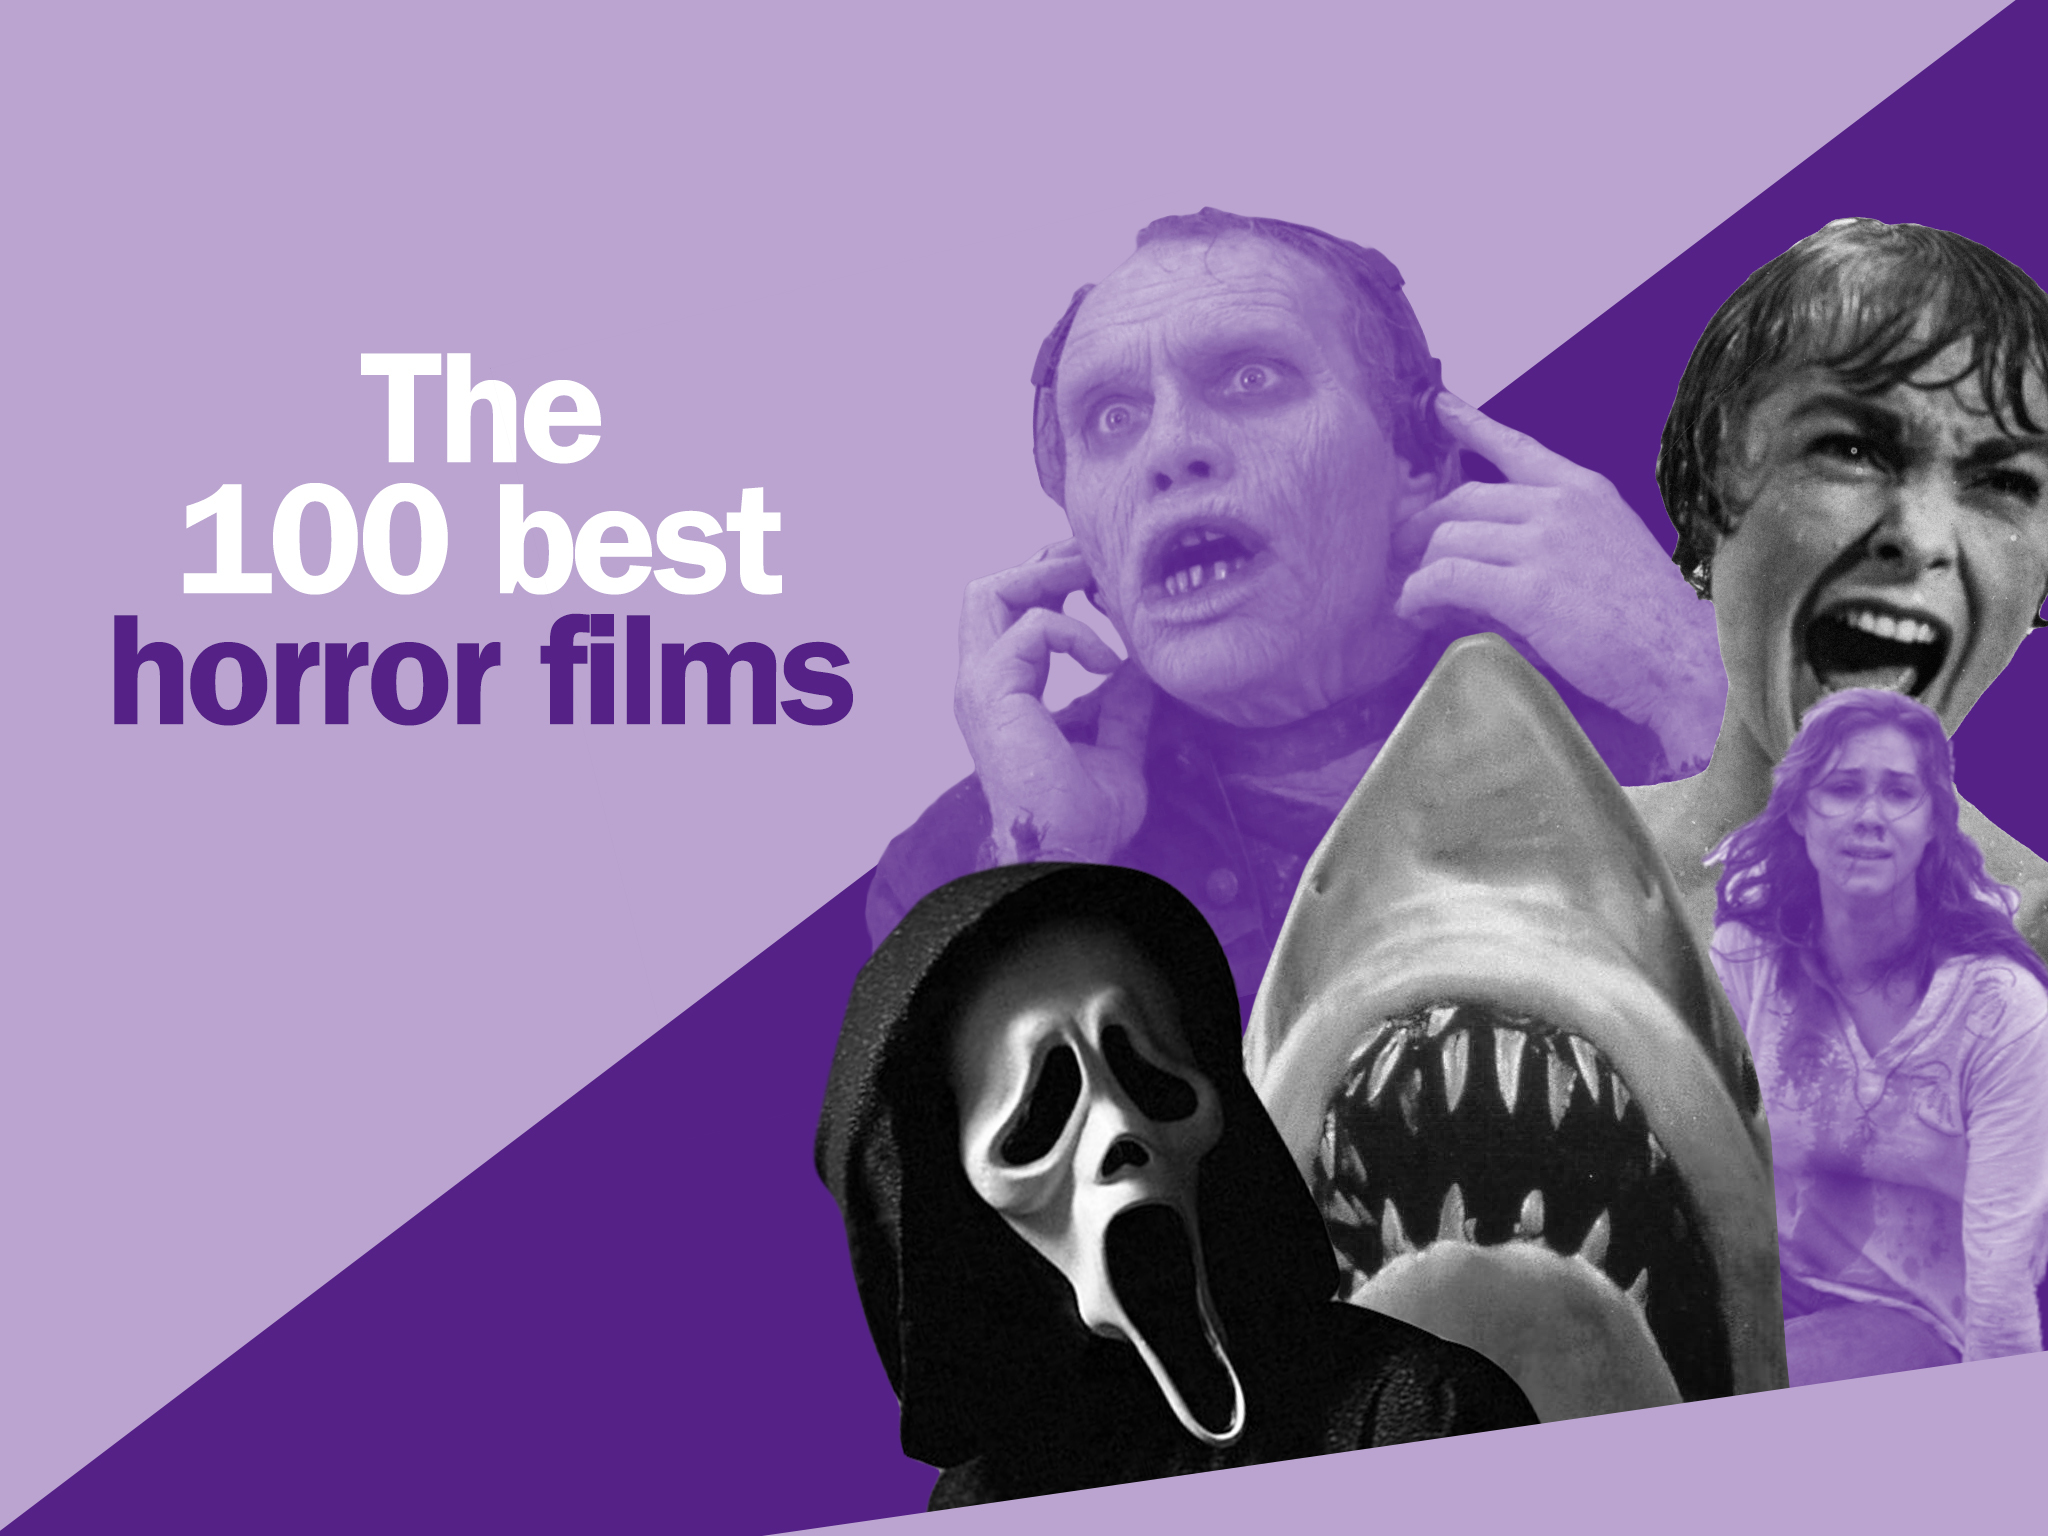 Rape Virgin Crying - The 100 Best Horror Movies of All Time - Scary Movies